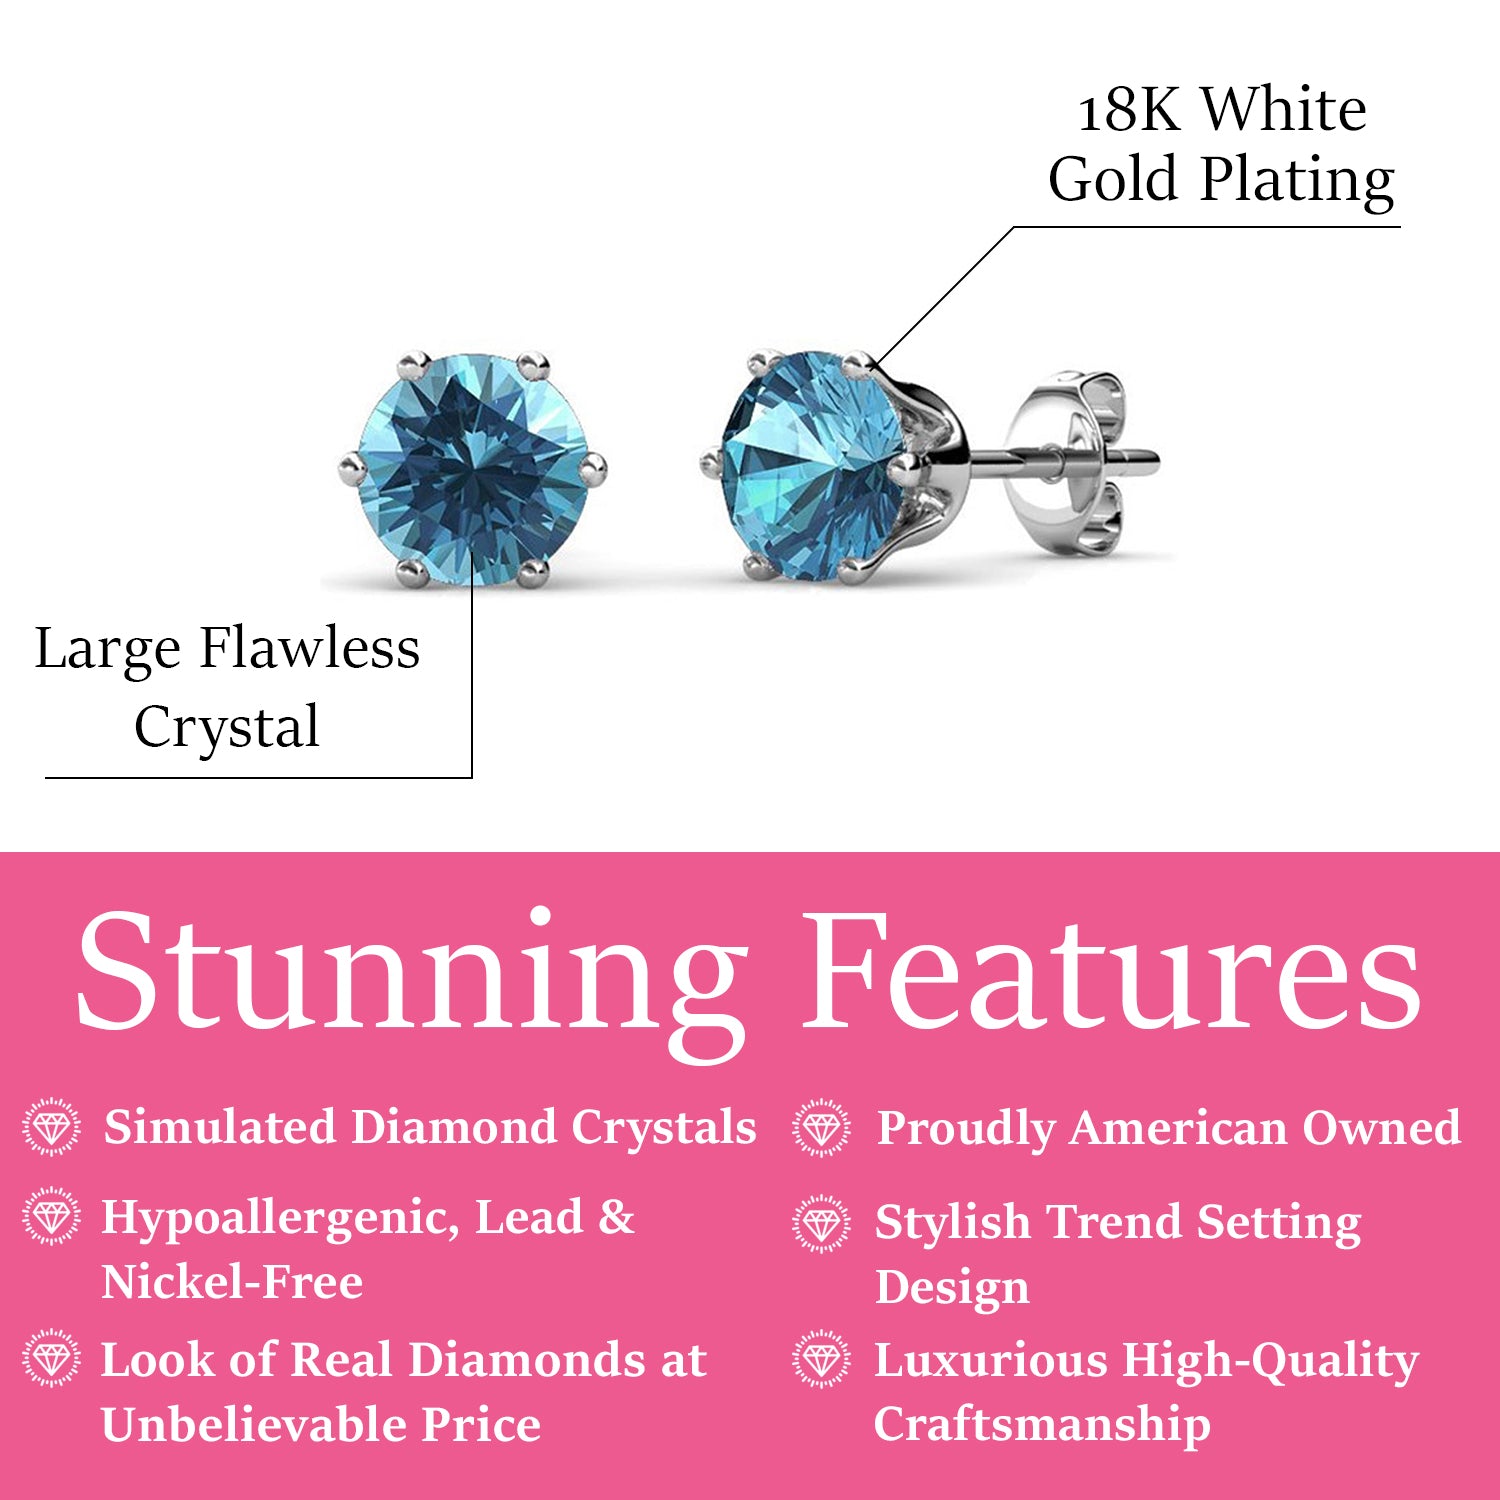 March Birthstone Aquamarine Earrings, 18k White Gold Plated Stud Earrings with 1CT Crystals